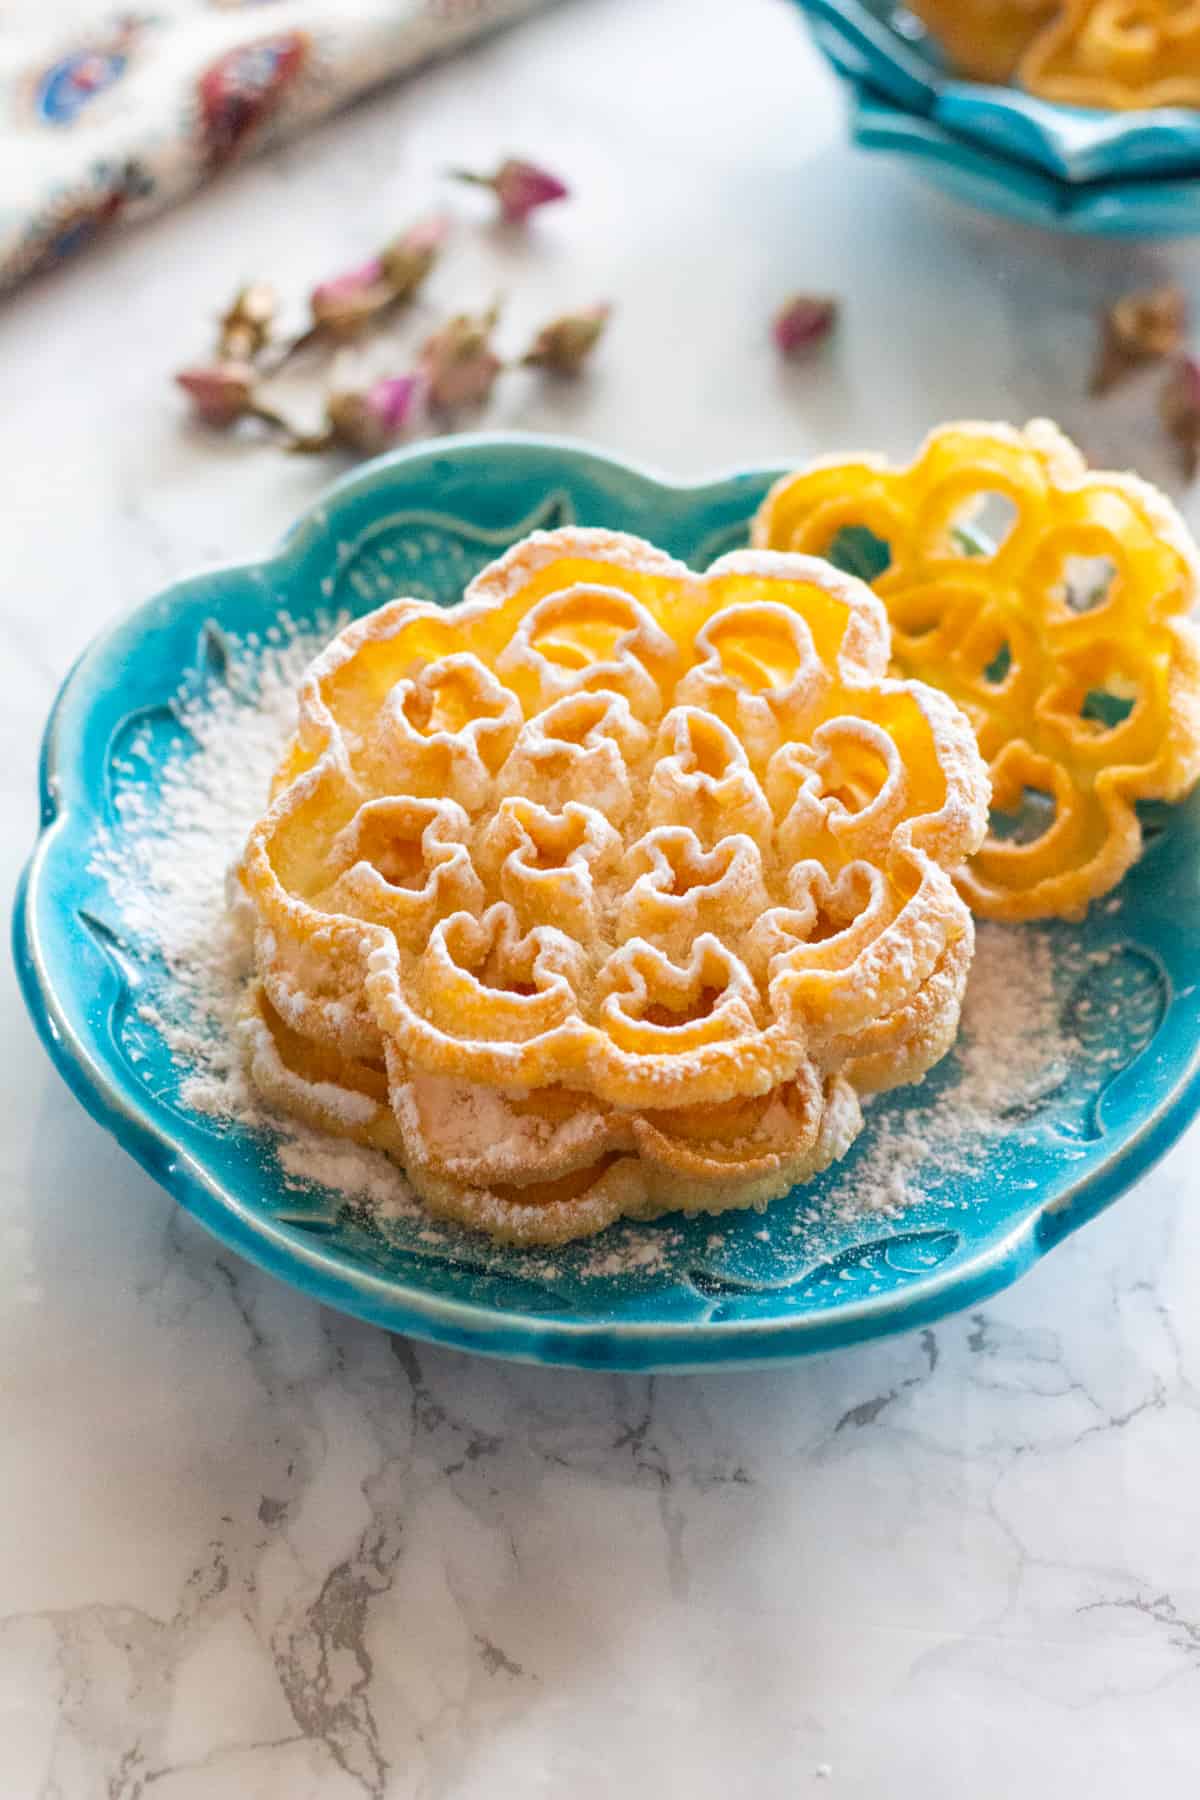 Nan Panjereh - Persian Rosettes is a traditional Persian cookie that is crisp and light. Once you find the technique, it is easy and fun to make!
